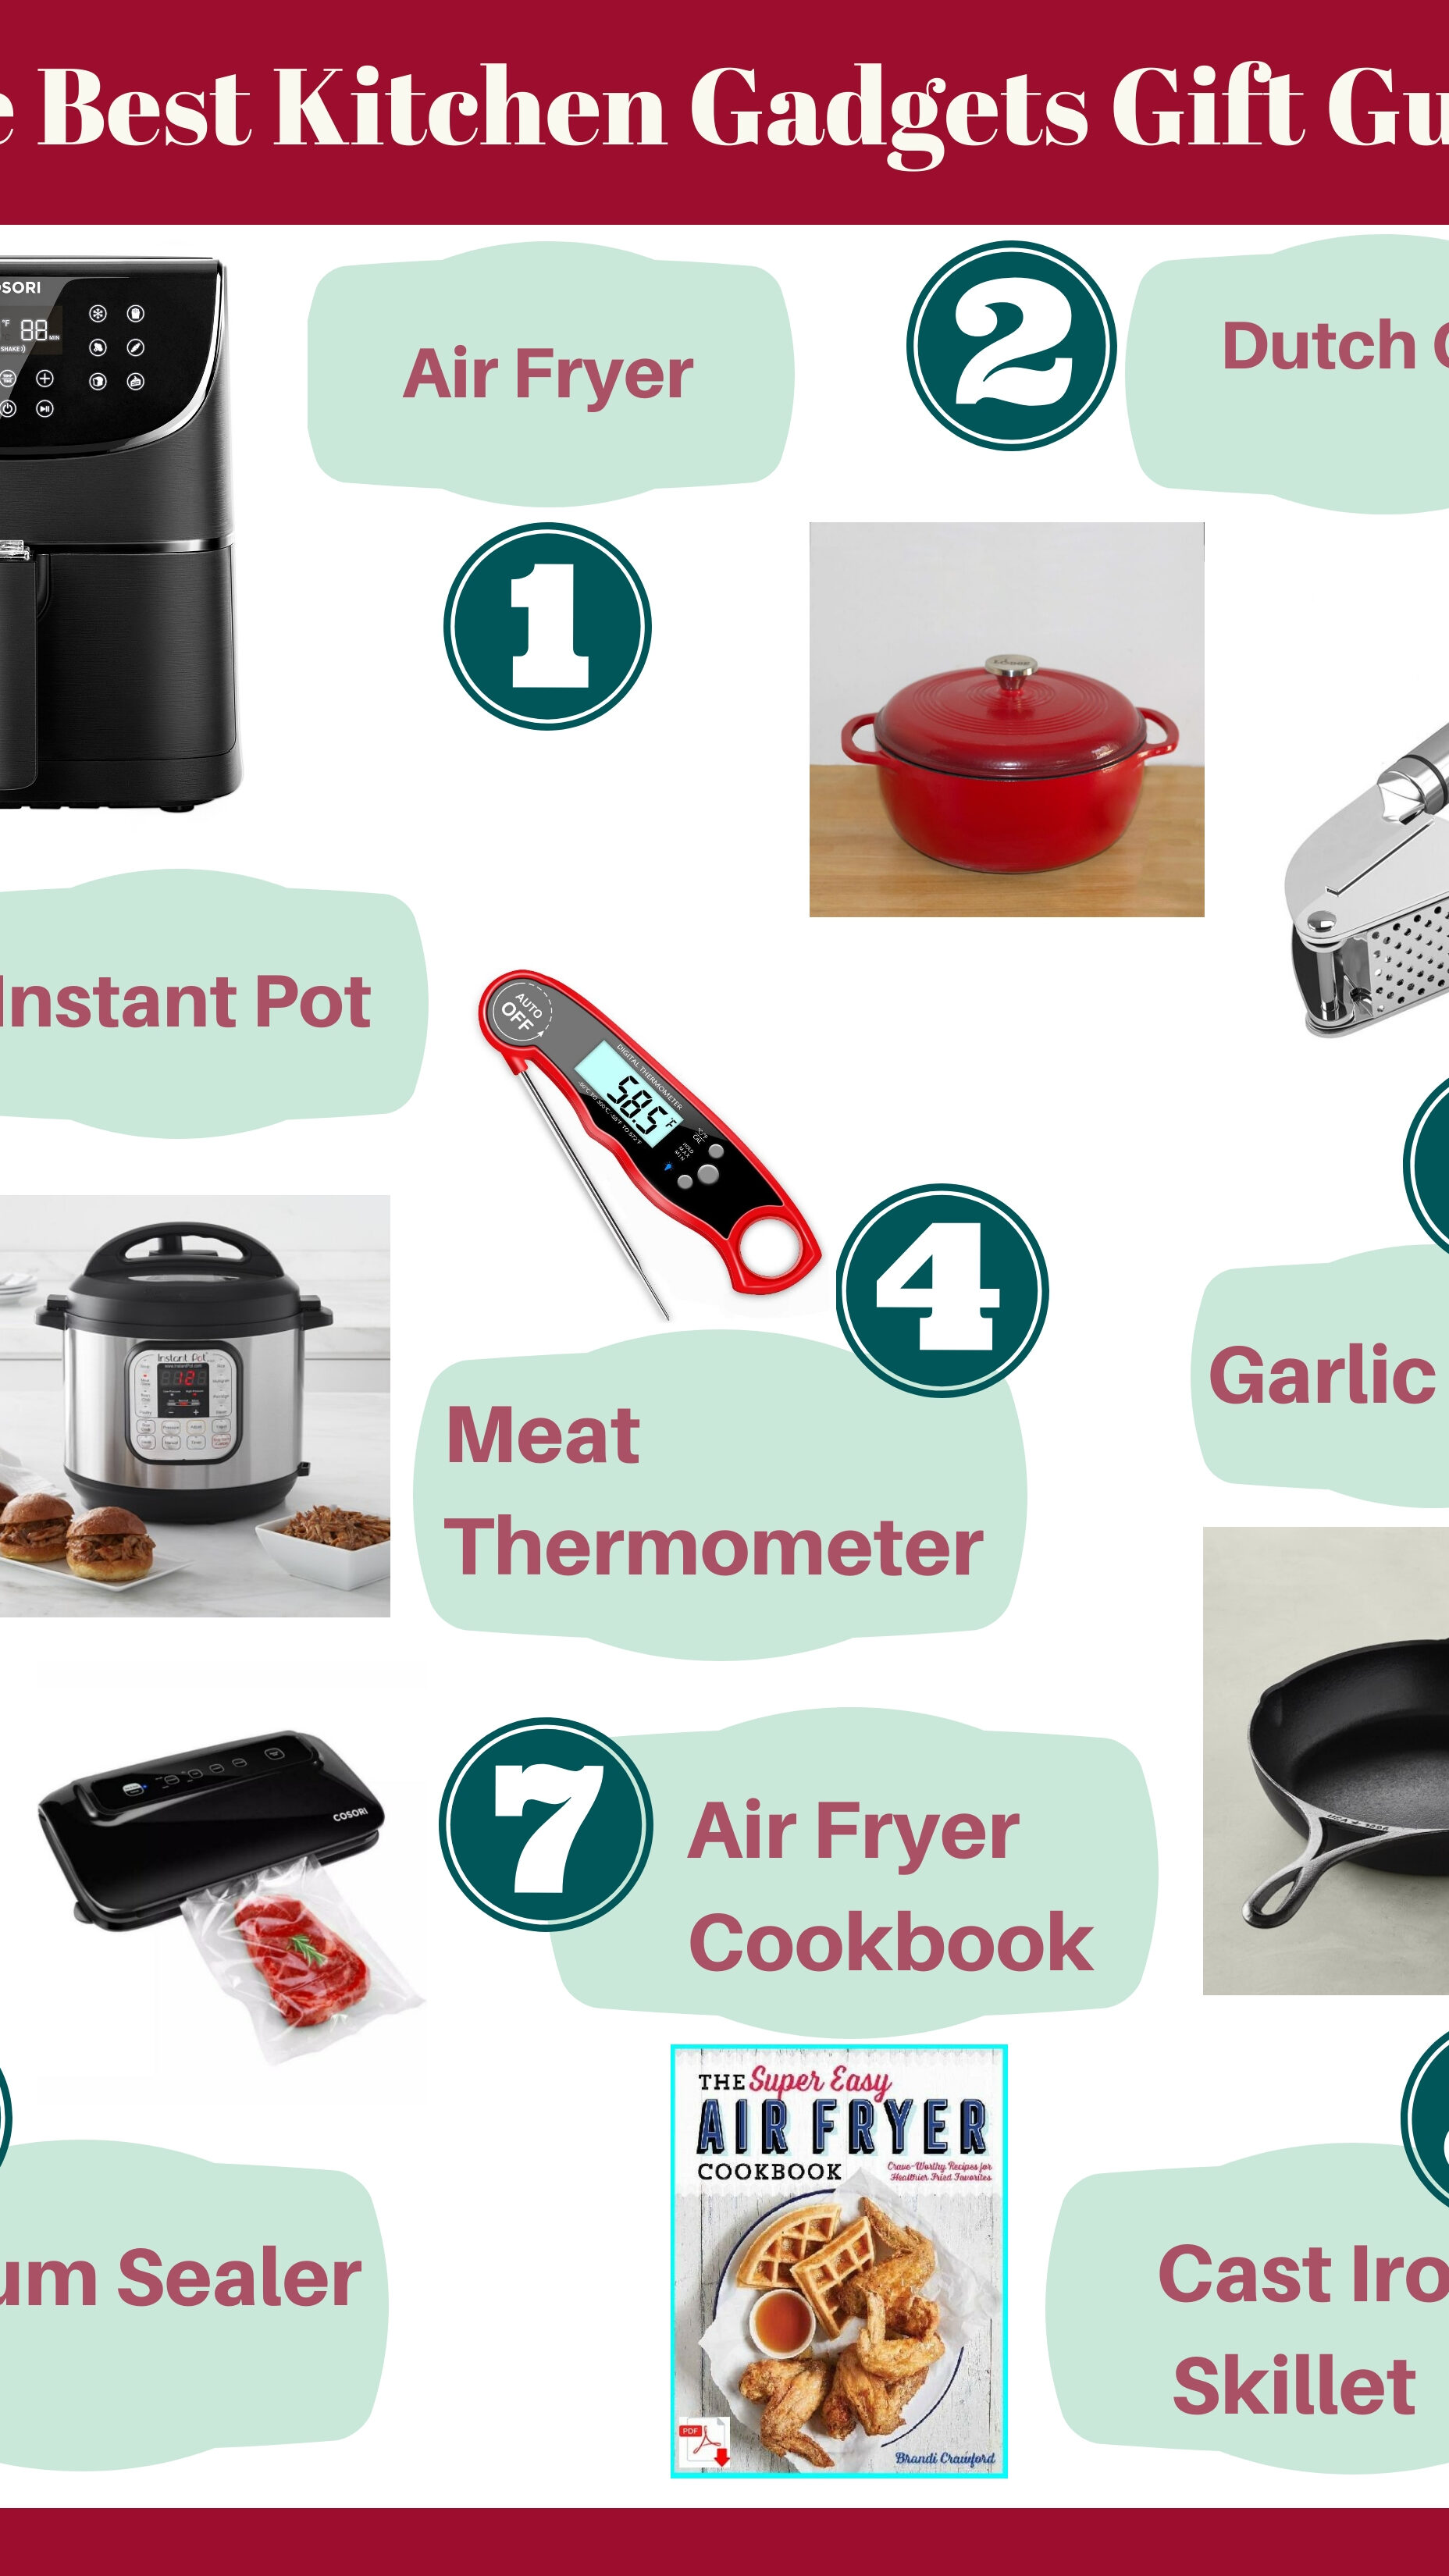 https://www.staysnatched.com/wp-content/uploads/2019/11/cropped-kitchen-gadgets-guide.jpg